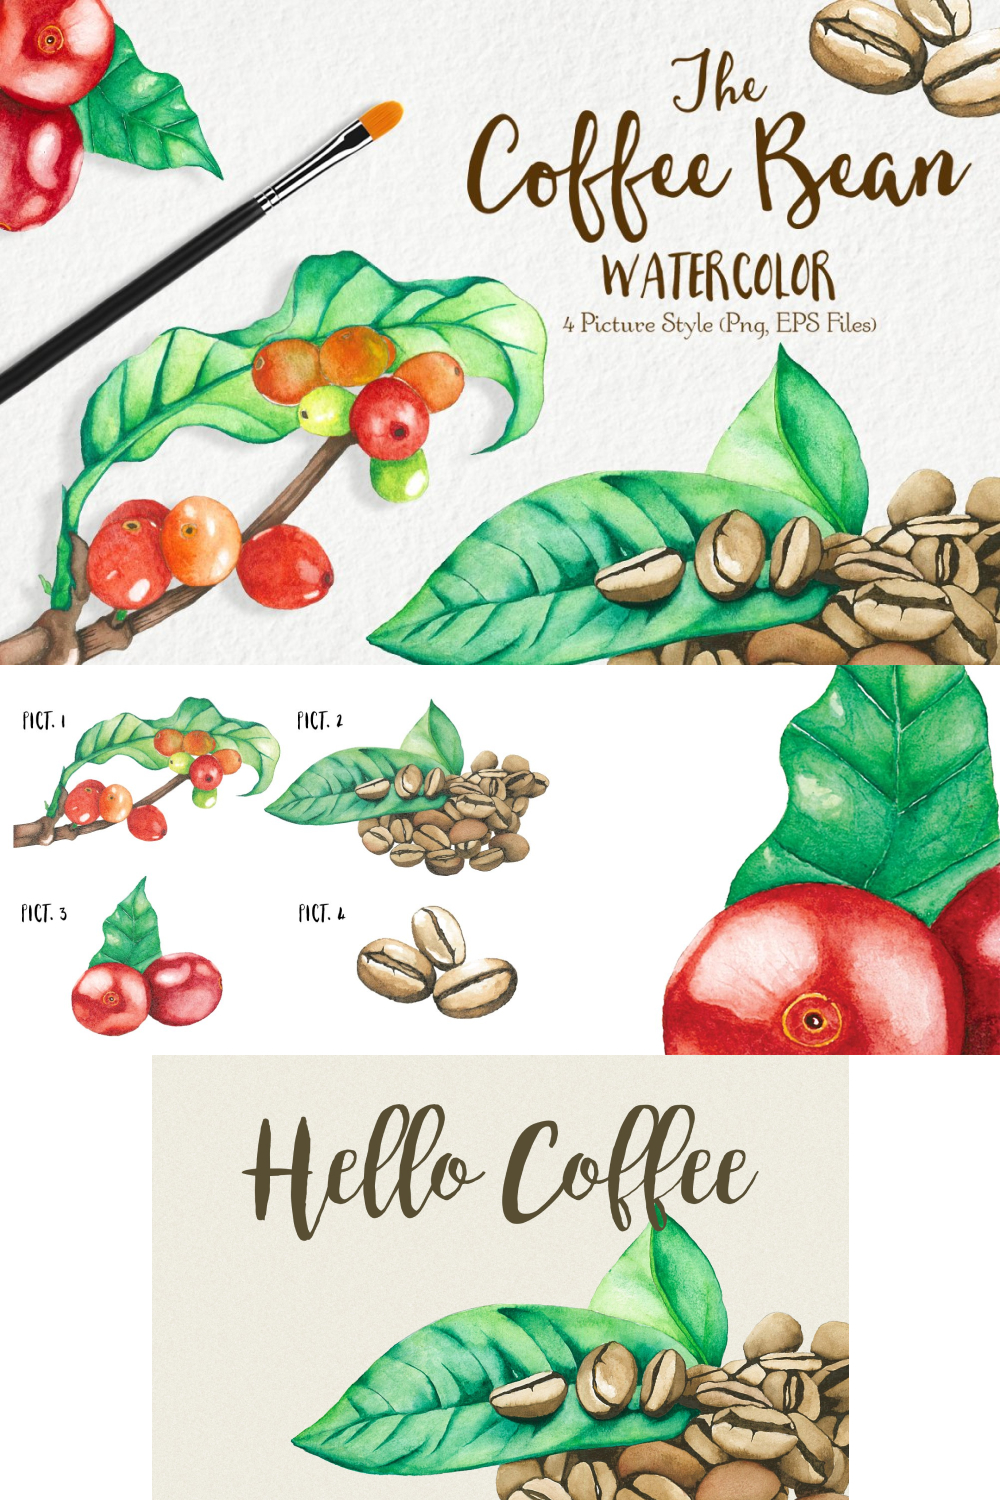 Watercolor coffee bean images of pinterest.